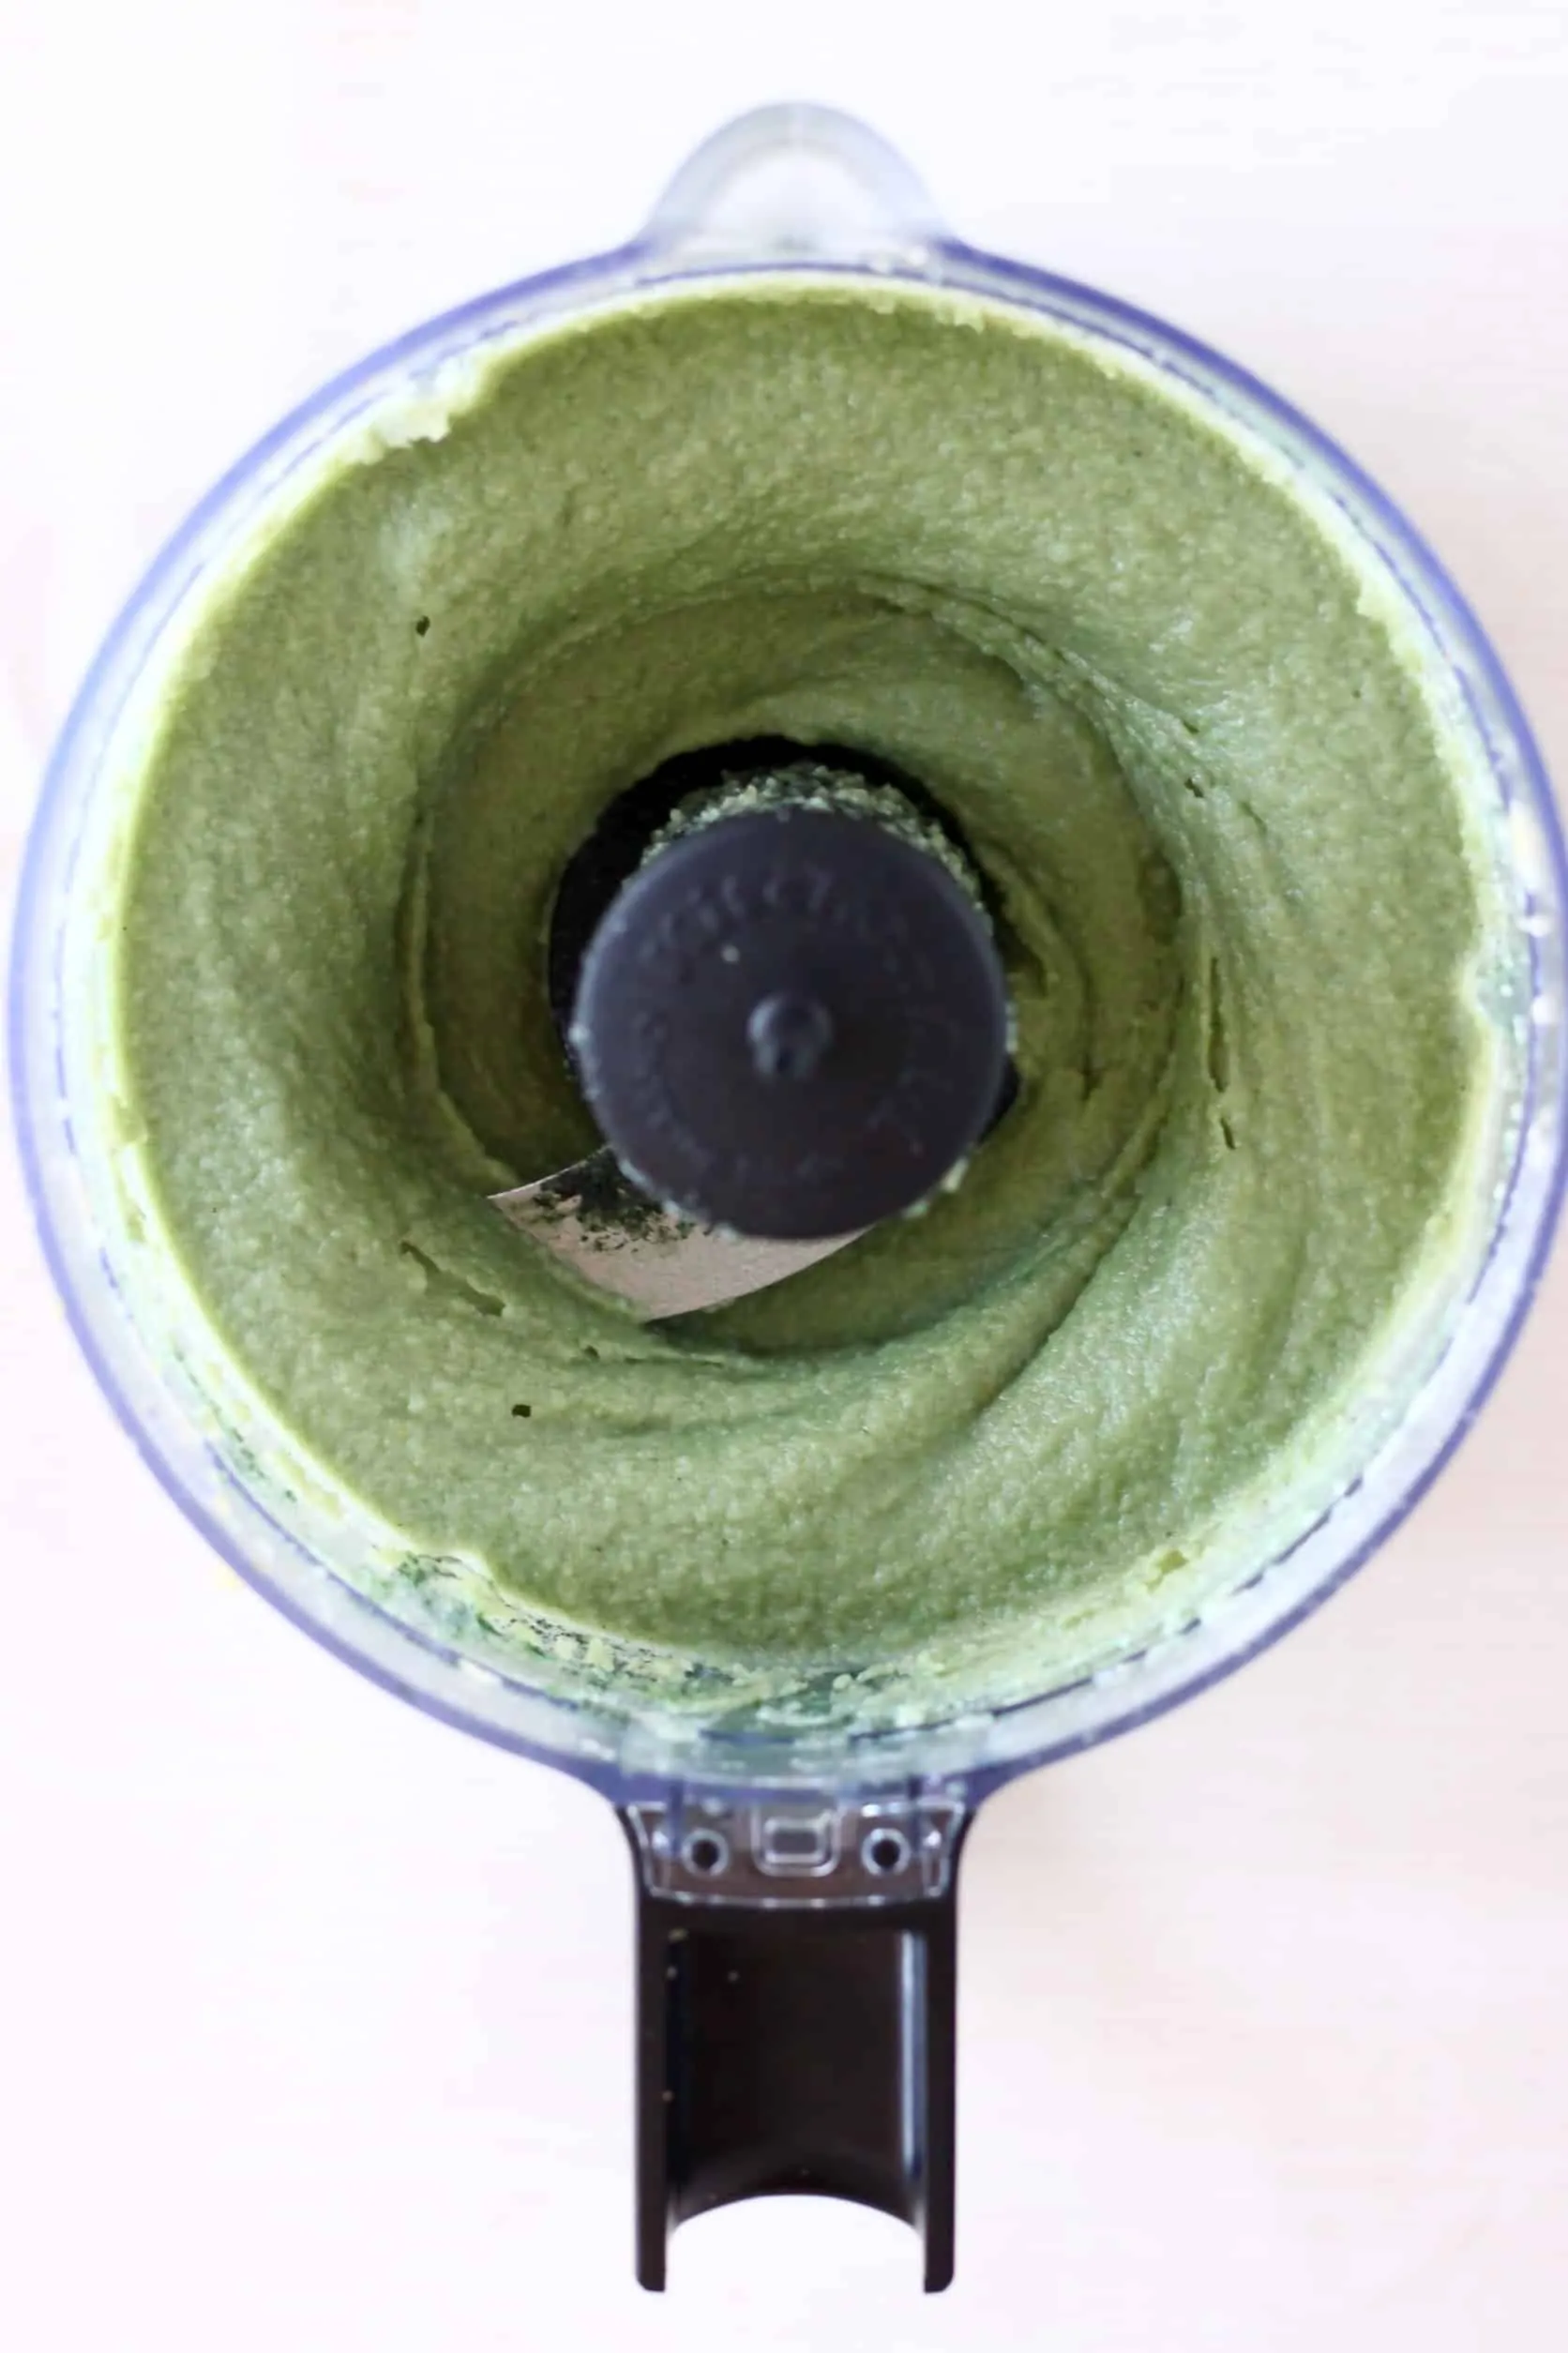 Green blended cashews in a food processor